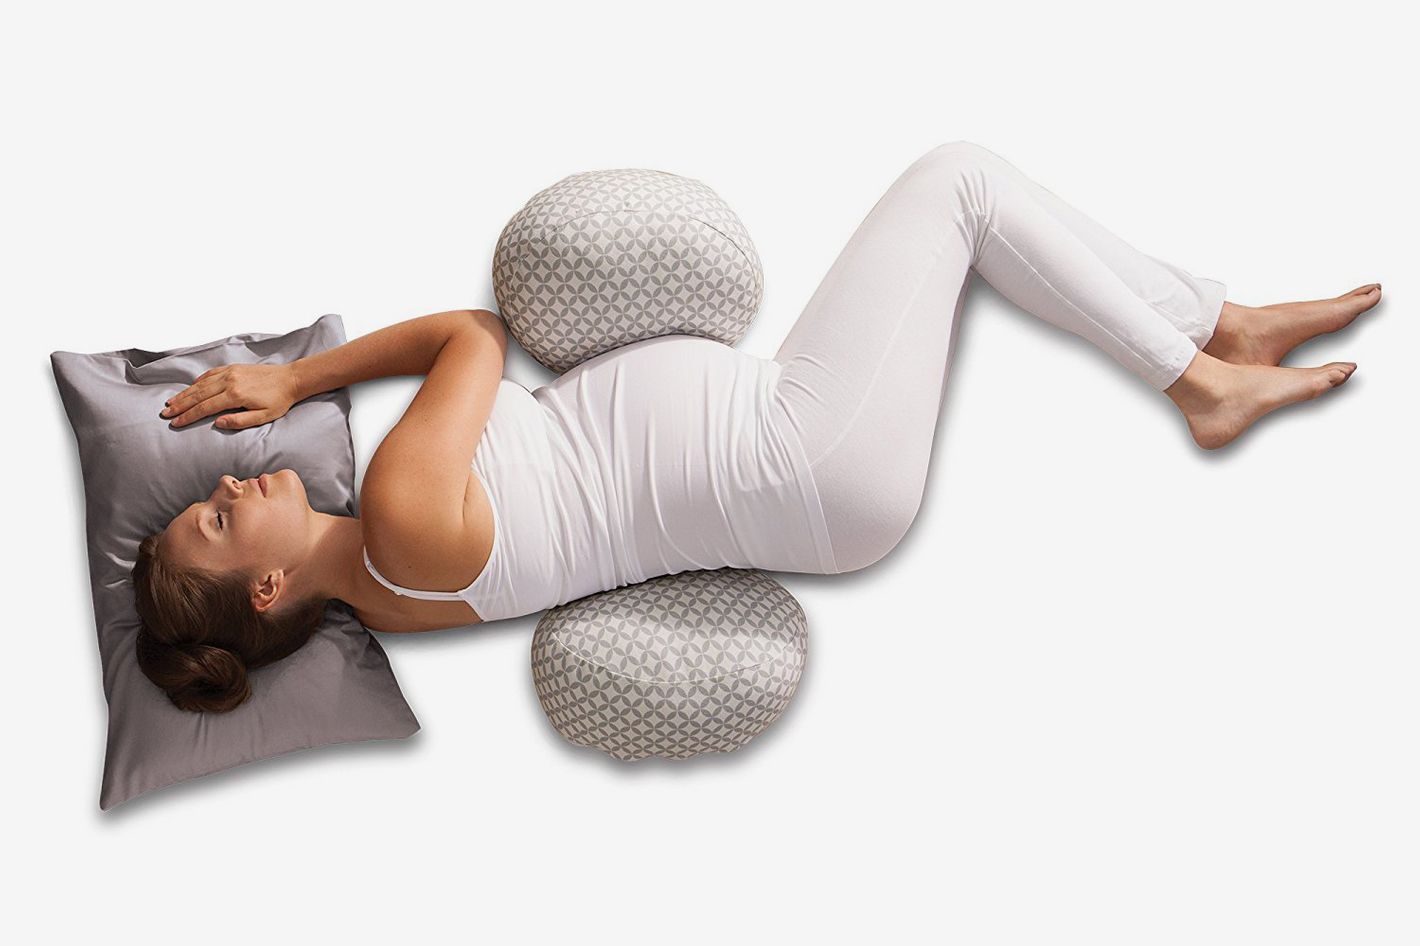 Nova Microdermabrasion Full Body Pregnancy Pillows U Shaped Maternity Pillow Back Support Pillow with Cotton Cover Zipper Removable & Washable 